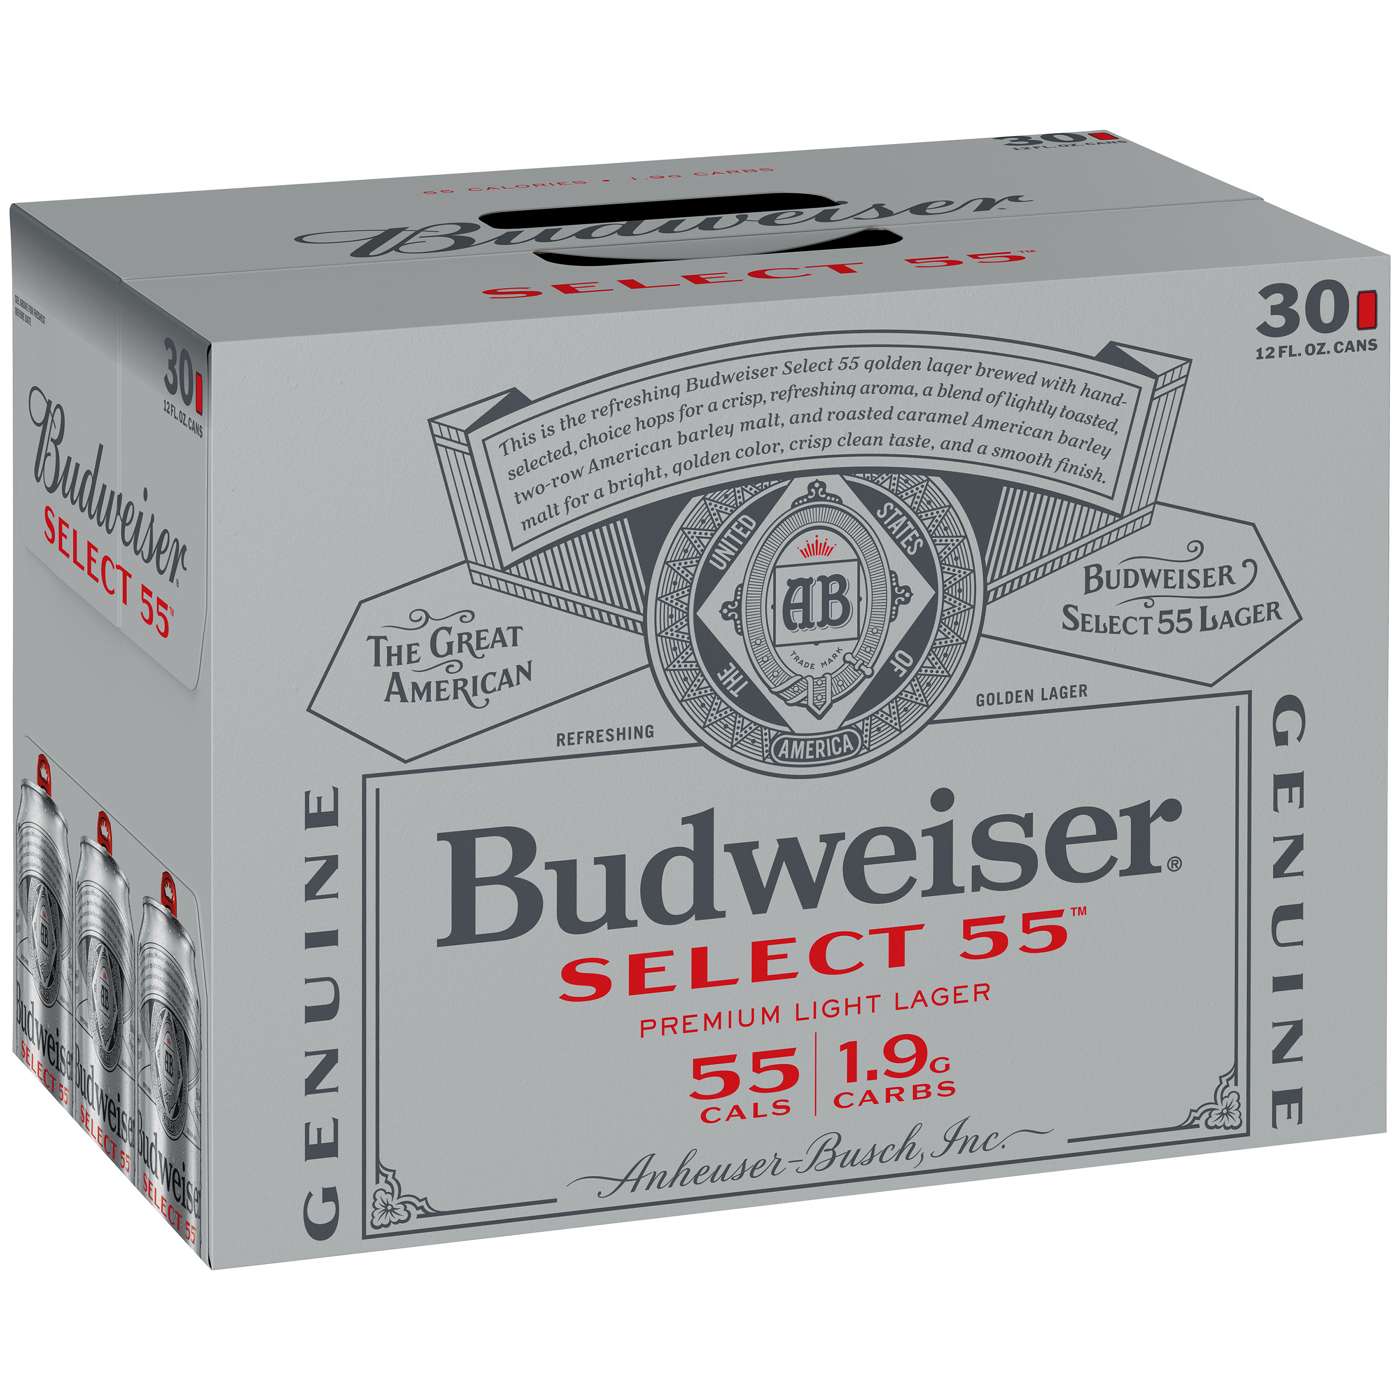 Budweiser Bud Select 55 Beer 12 oz Cans; image 1 of 2